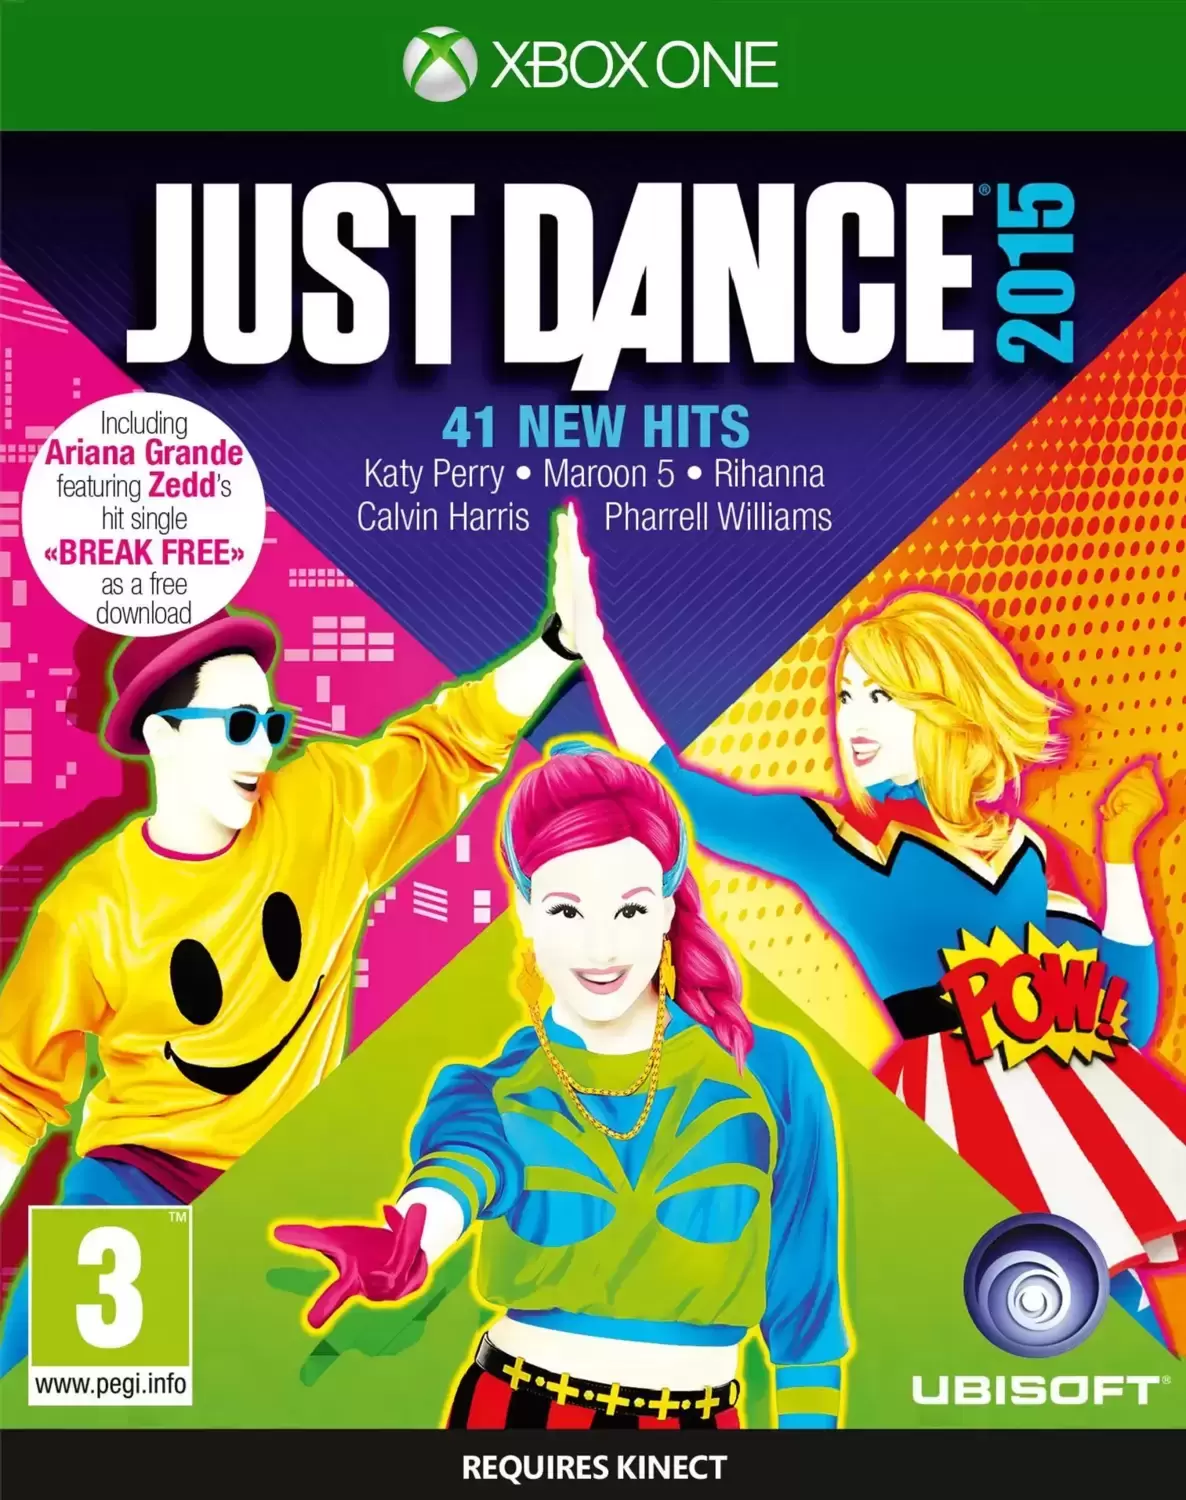 XBOX One Games - Just dance 2015